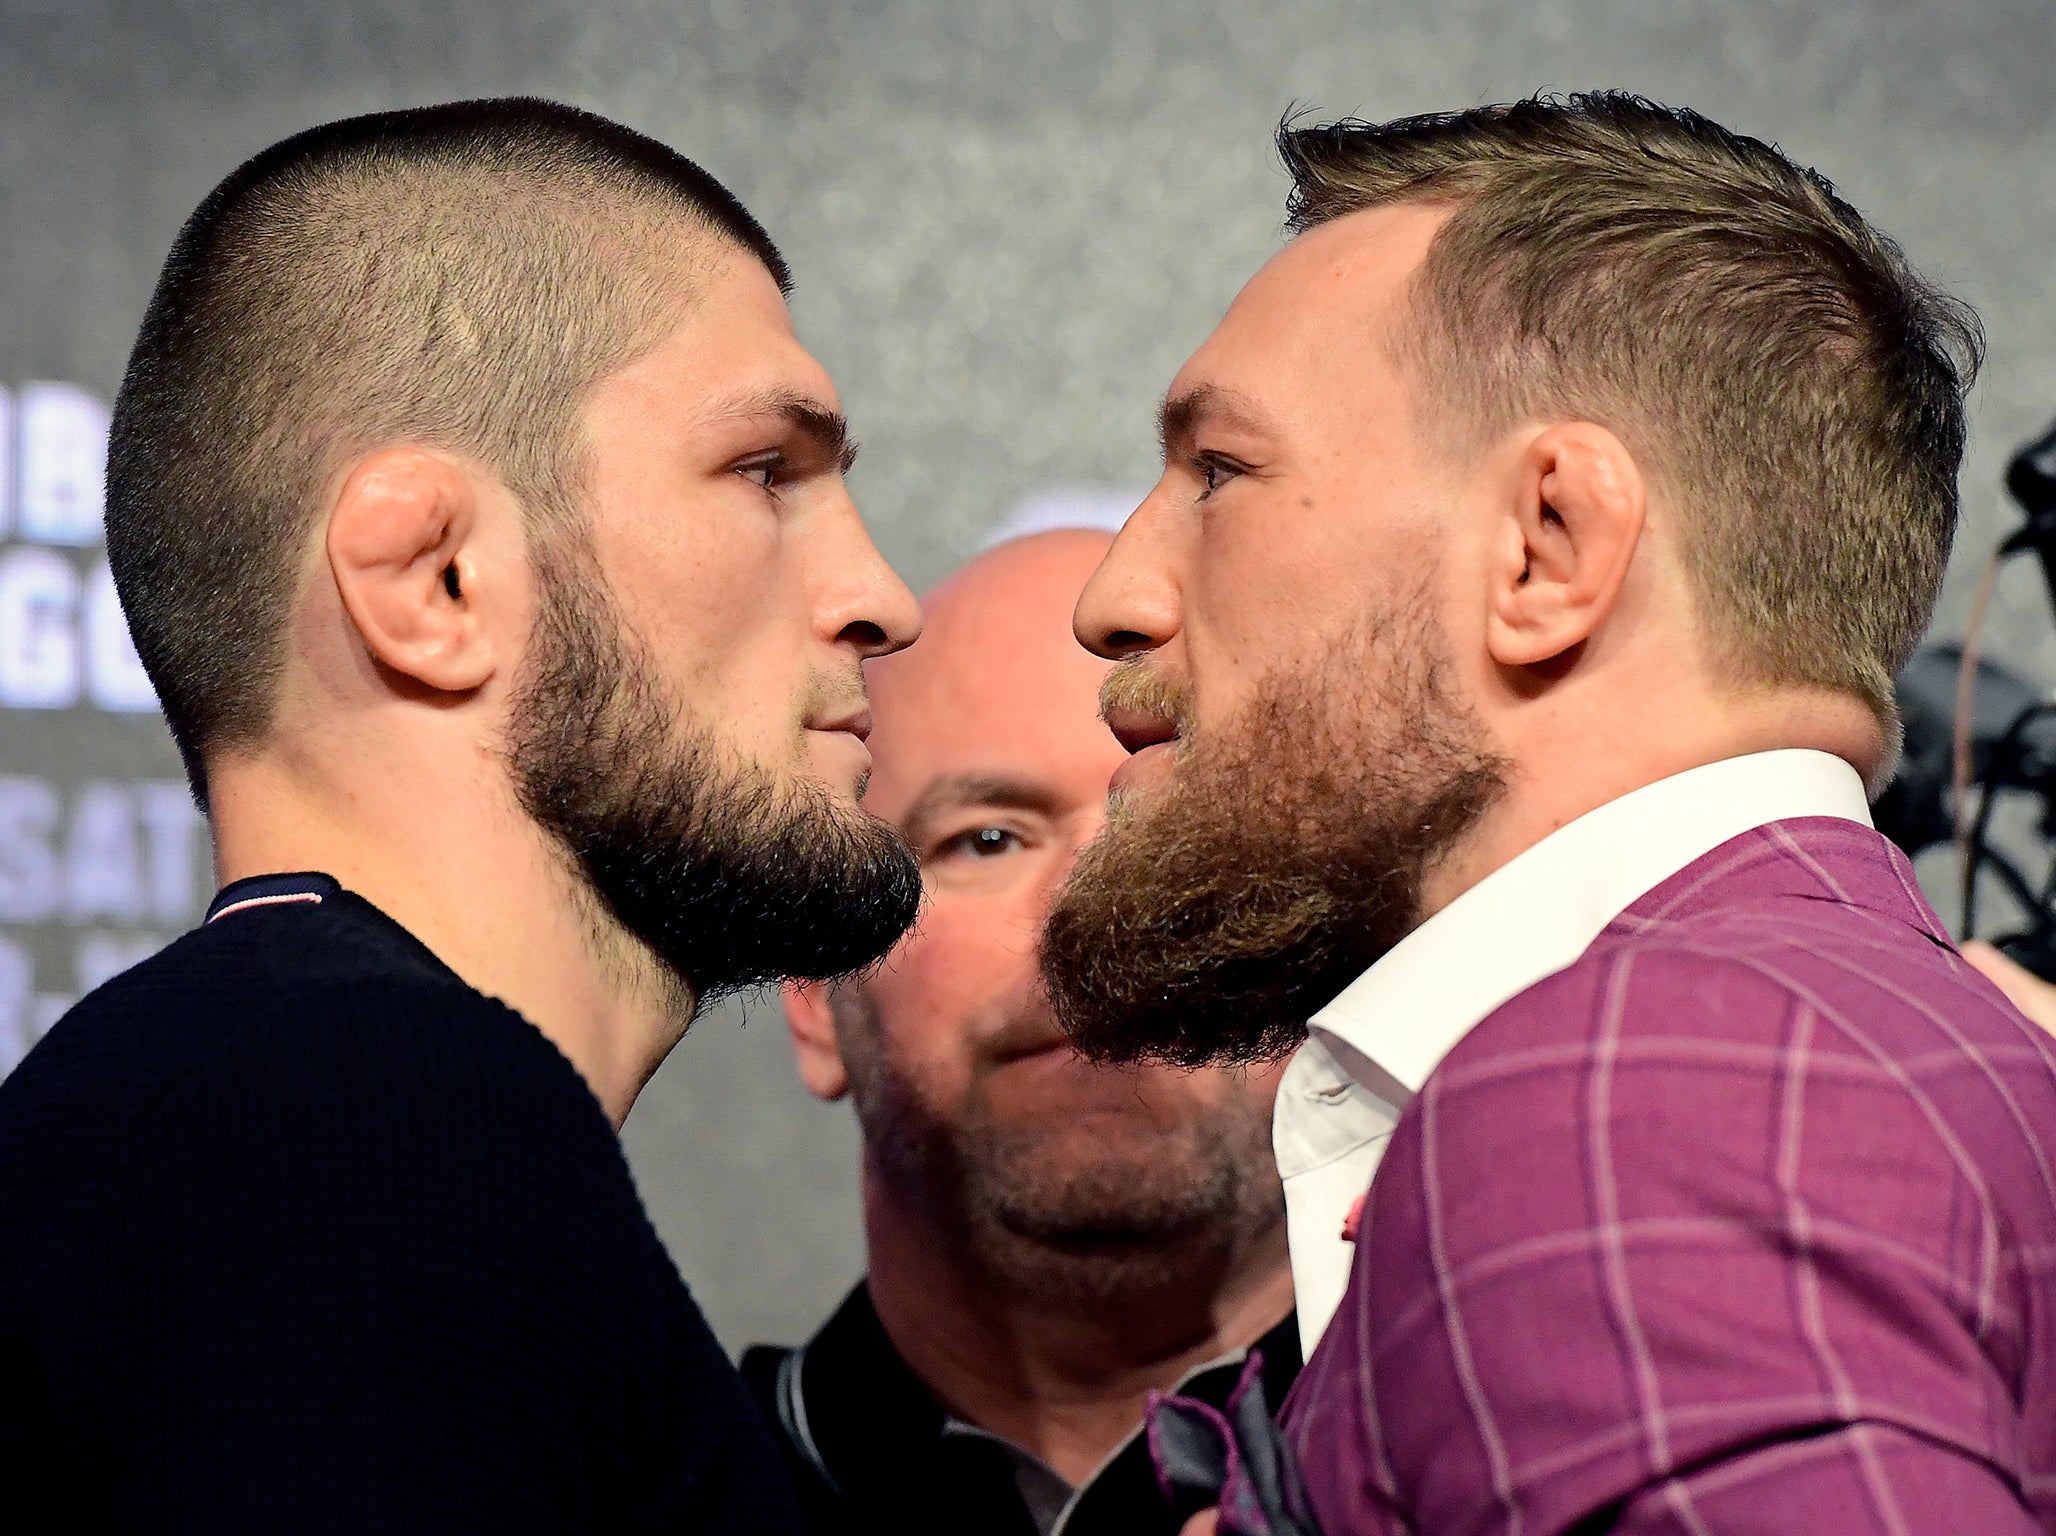 Khabib is fierce rivals with Conor McGregor